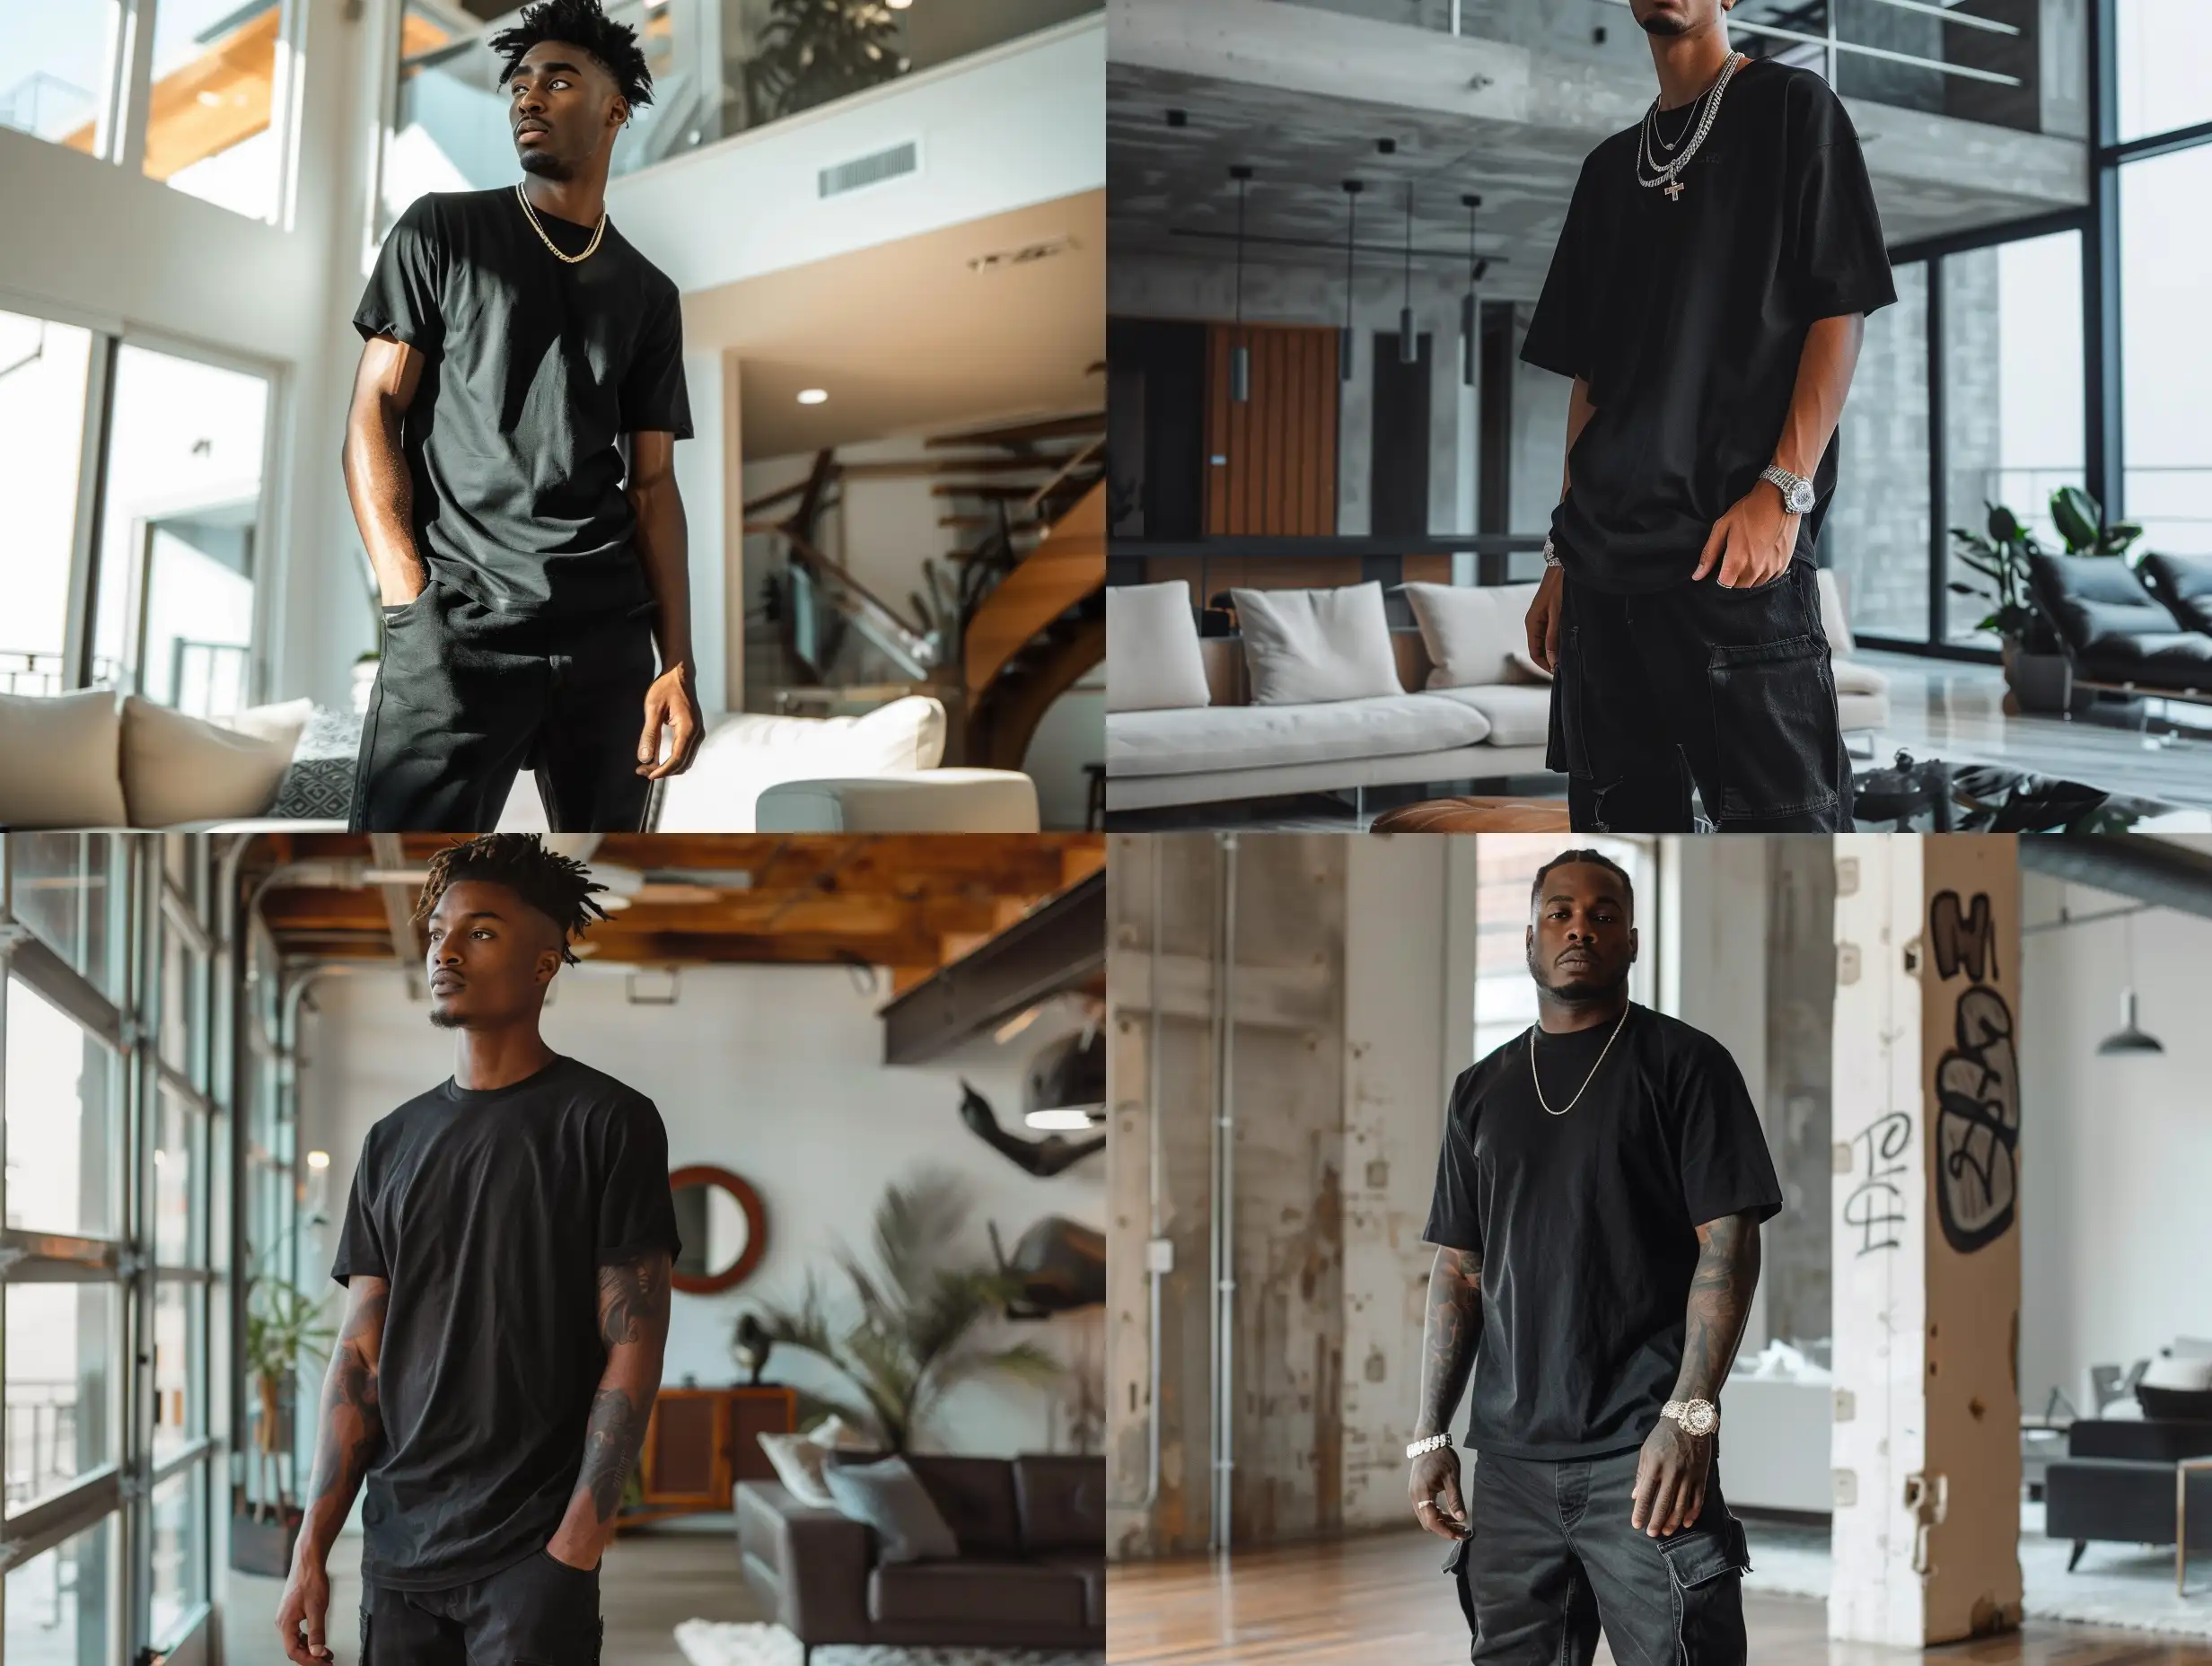 tall male with hip-hop style, with black T-shirt, black baggy jeans, standing in side of a luxury loft